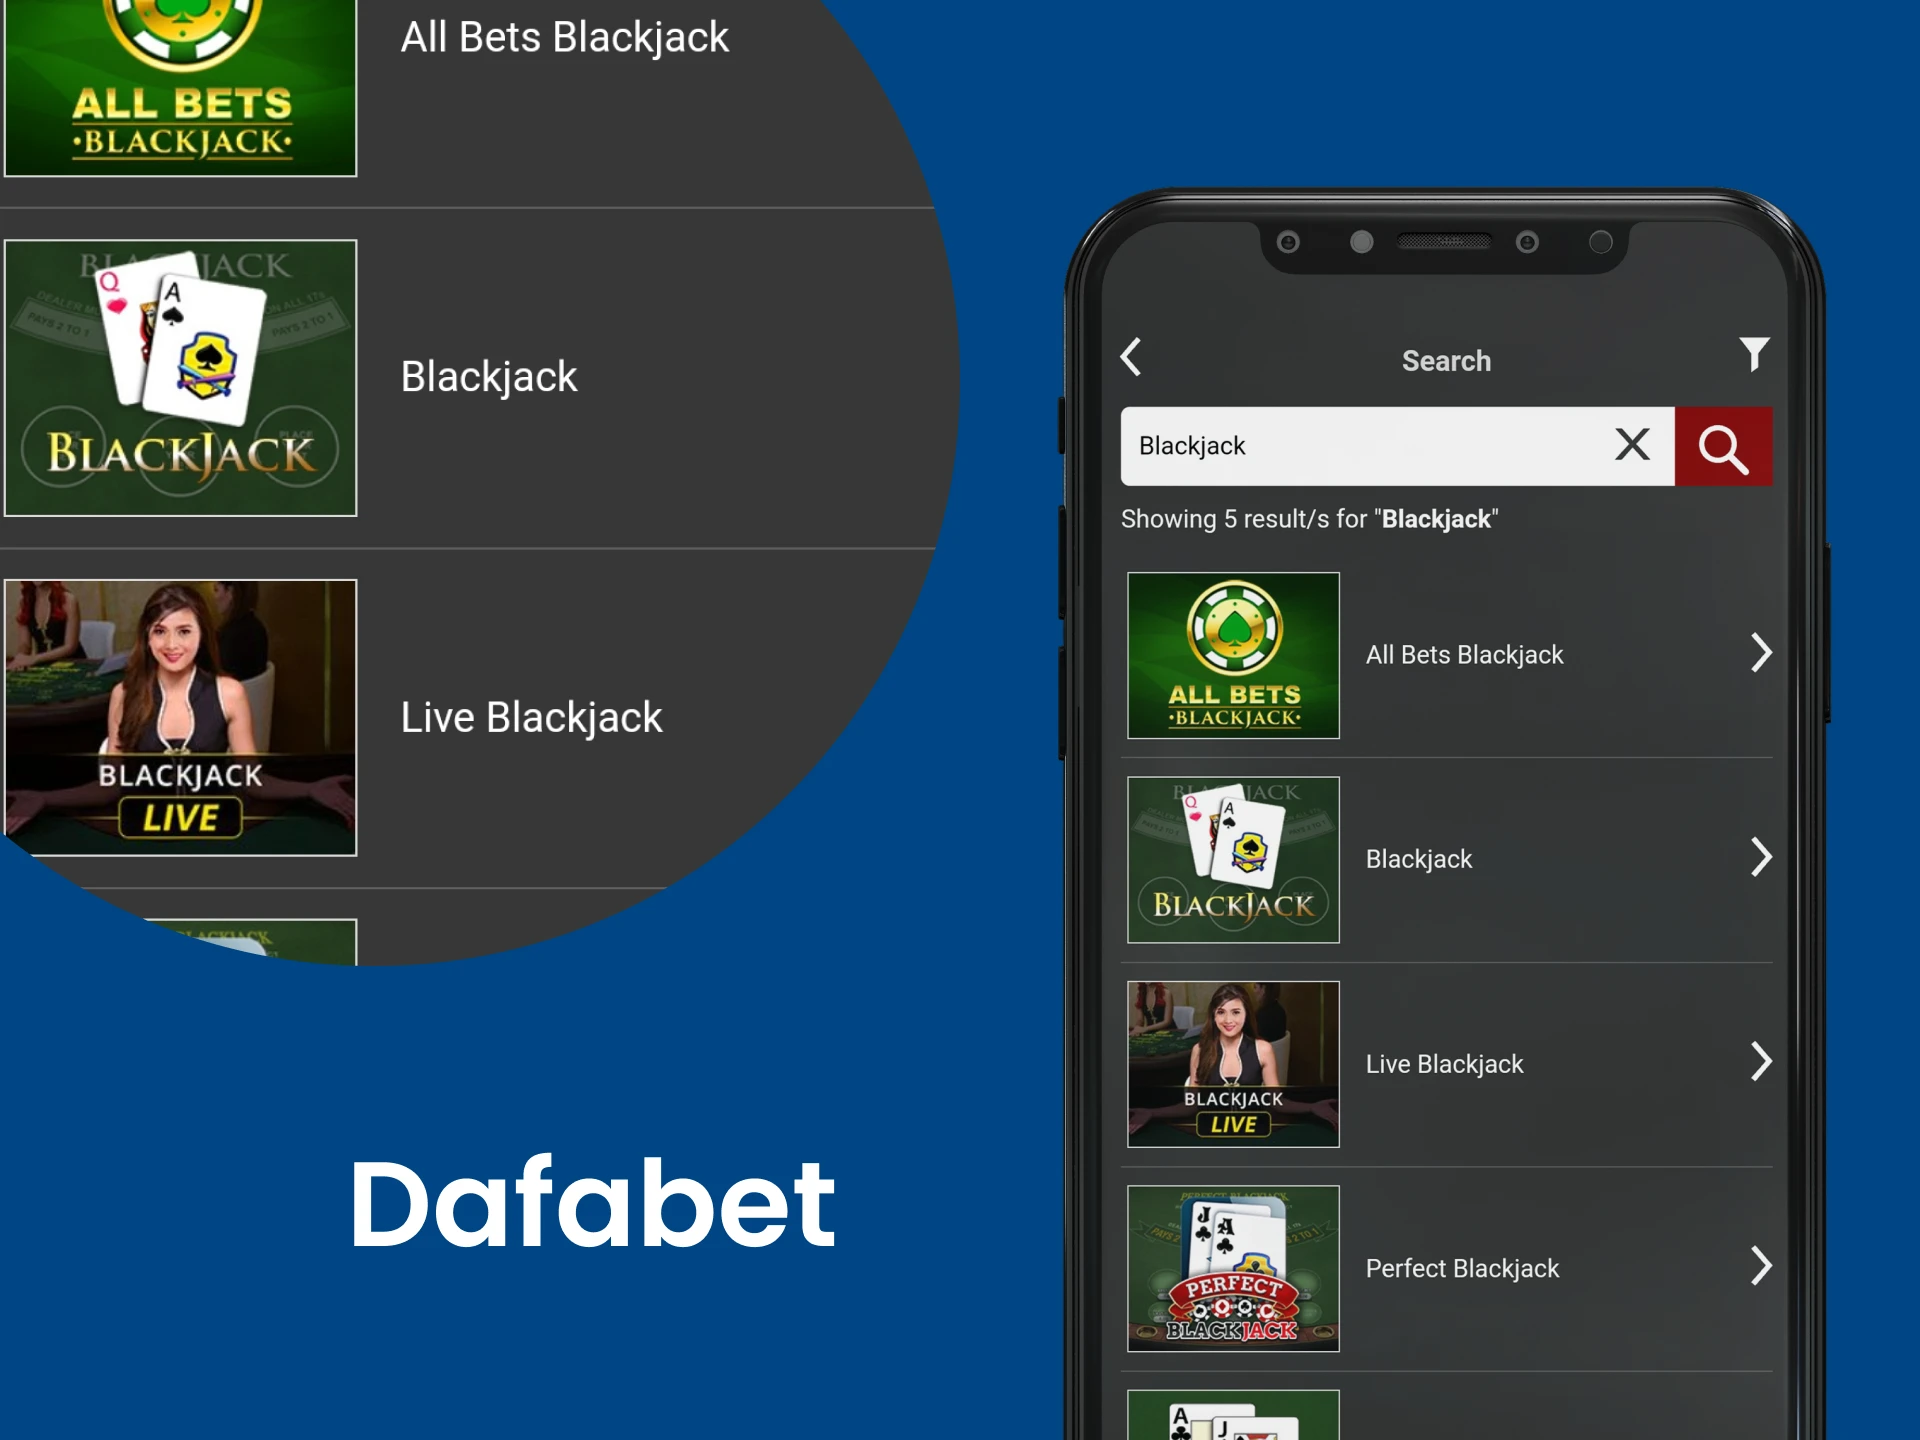 Download the Dafabet app to play Blackjack.